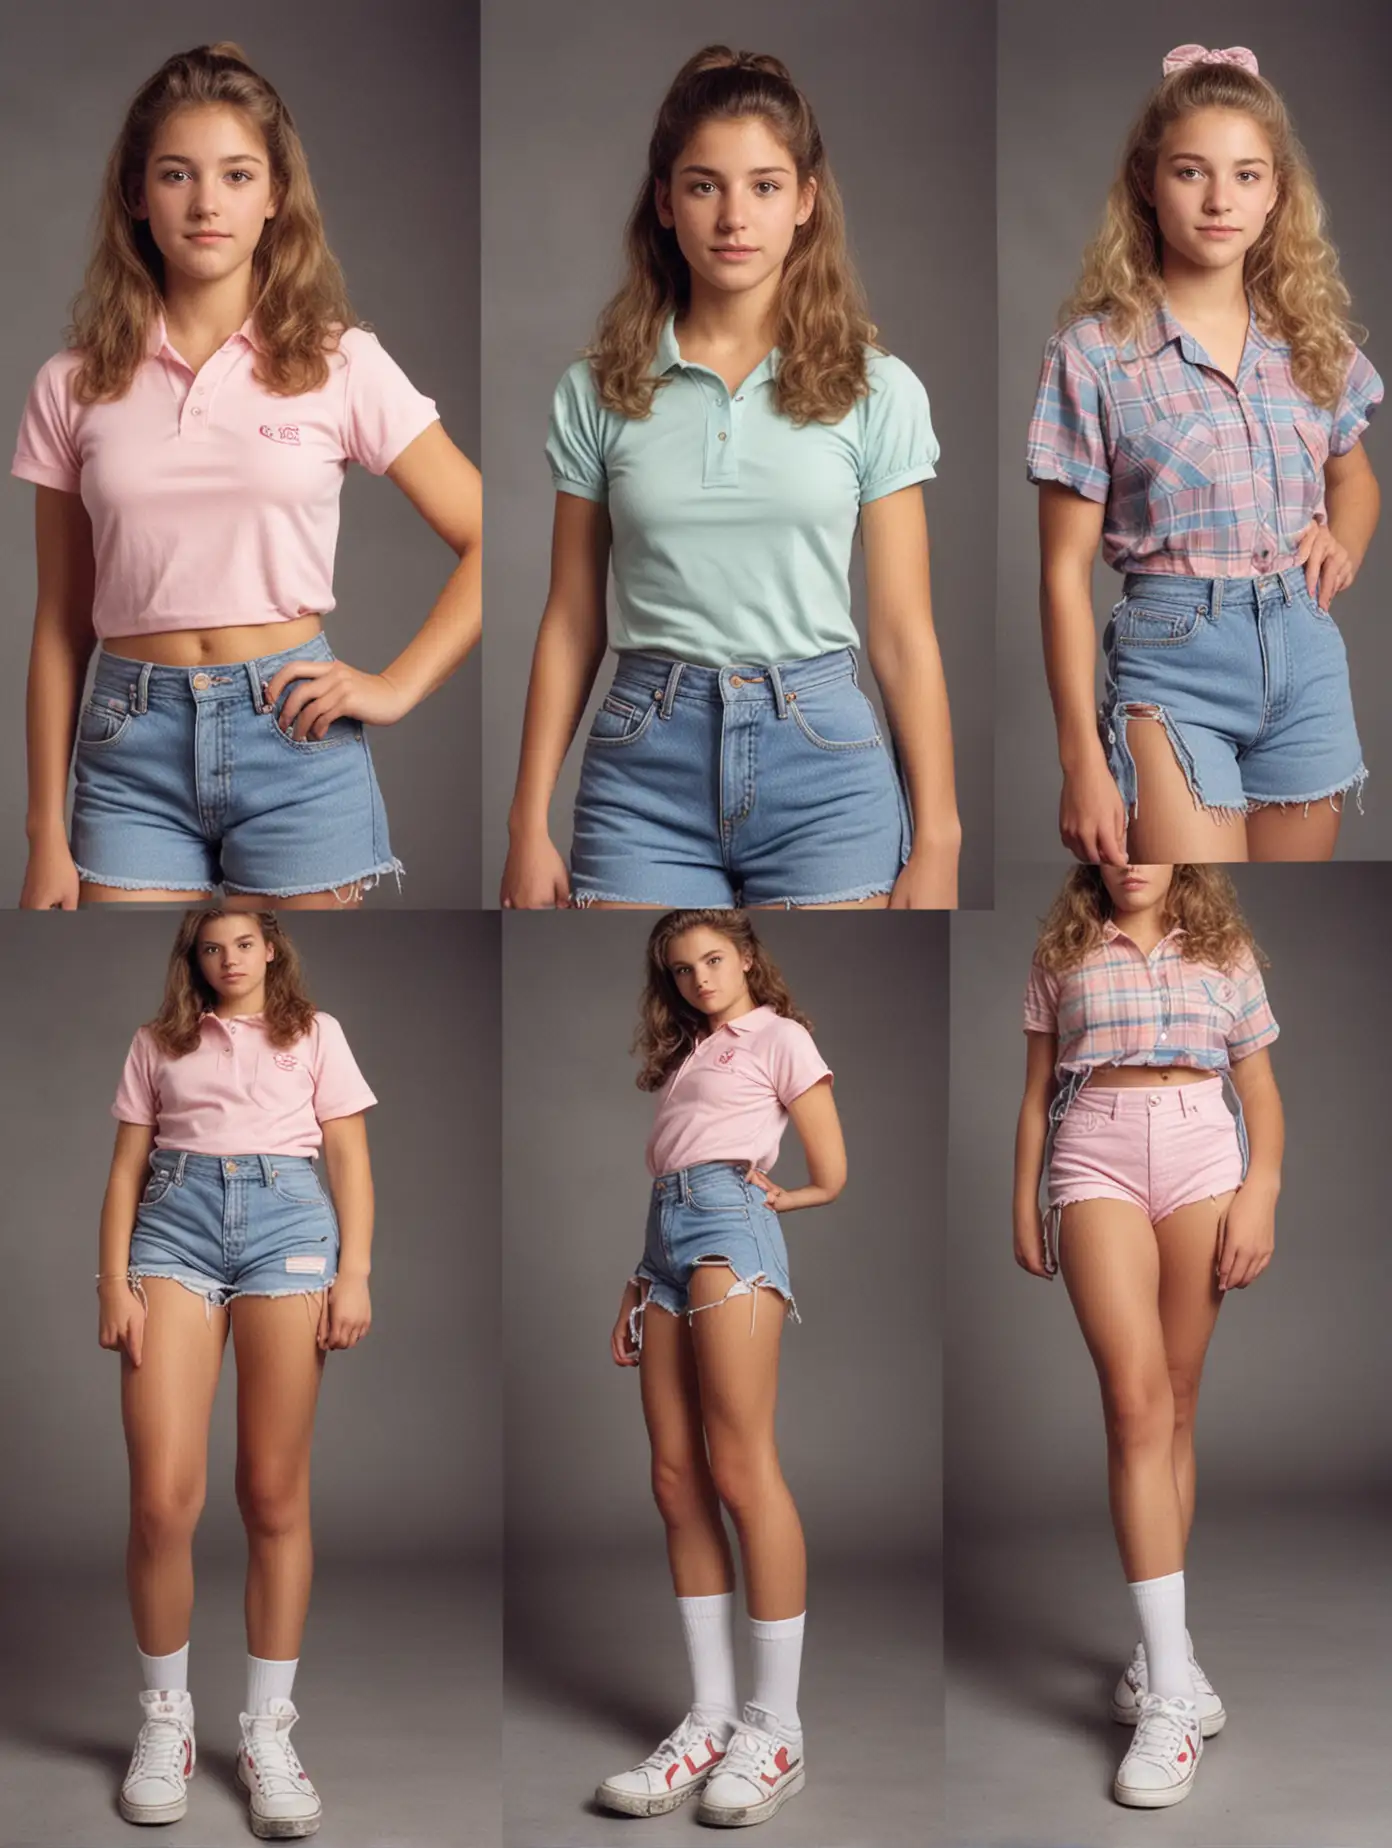 Old photos of American school girls from the 80s and 90s facing the camera, 18 years old, full body photos